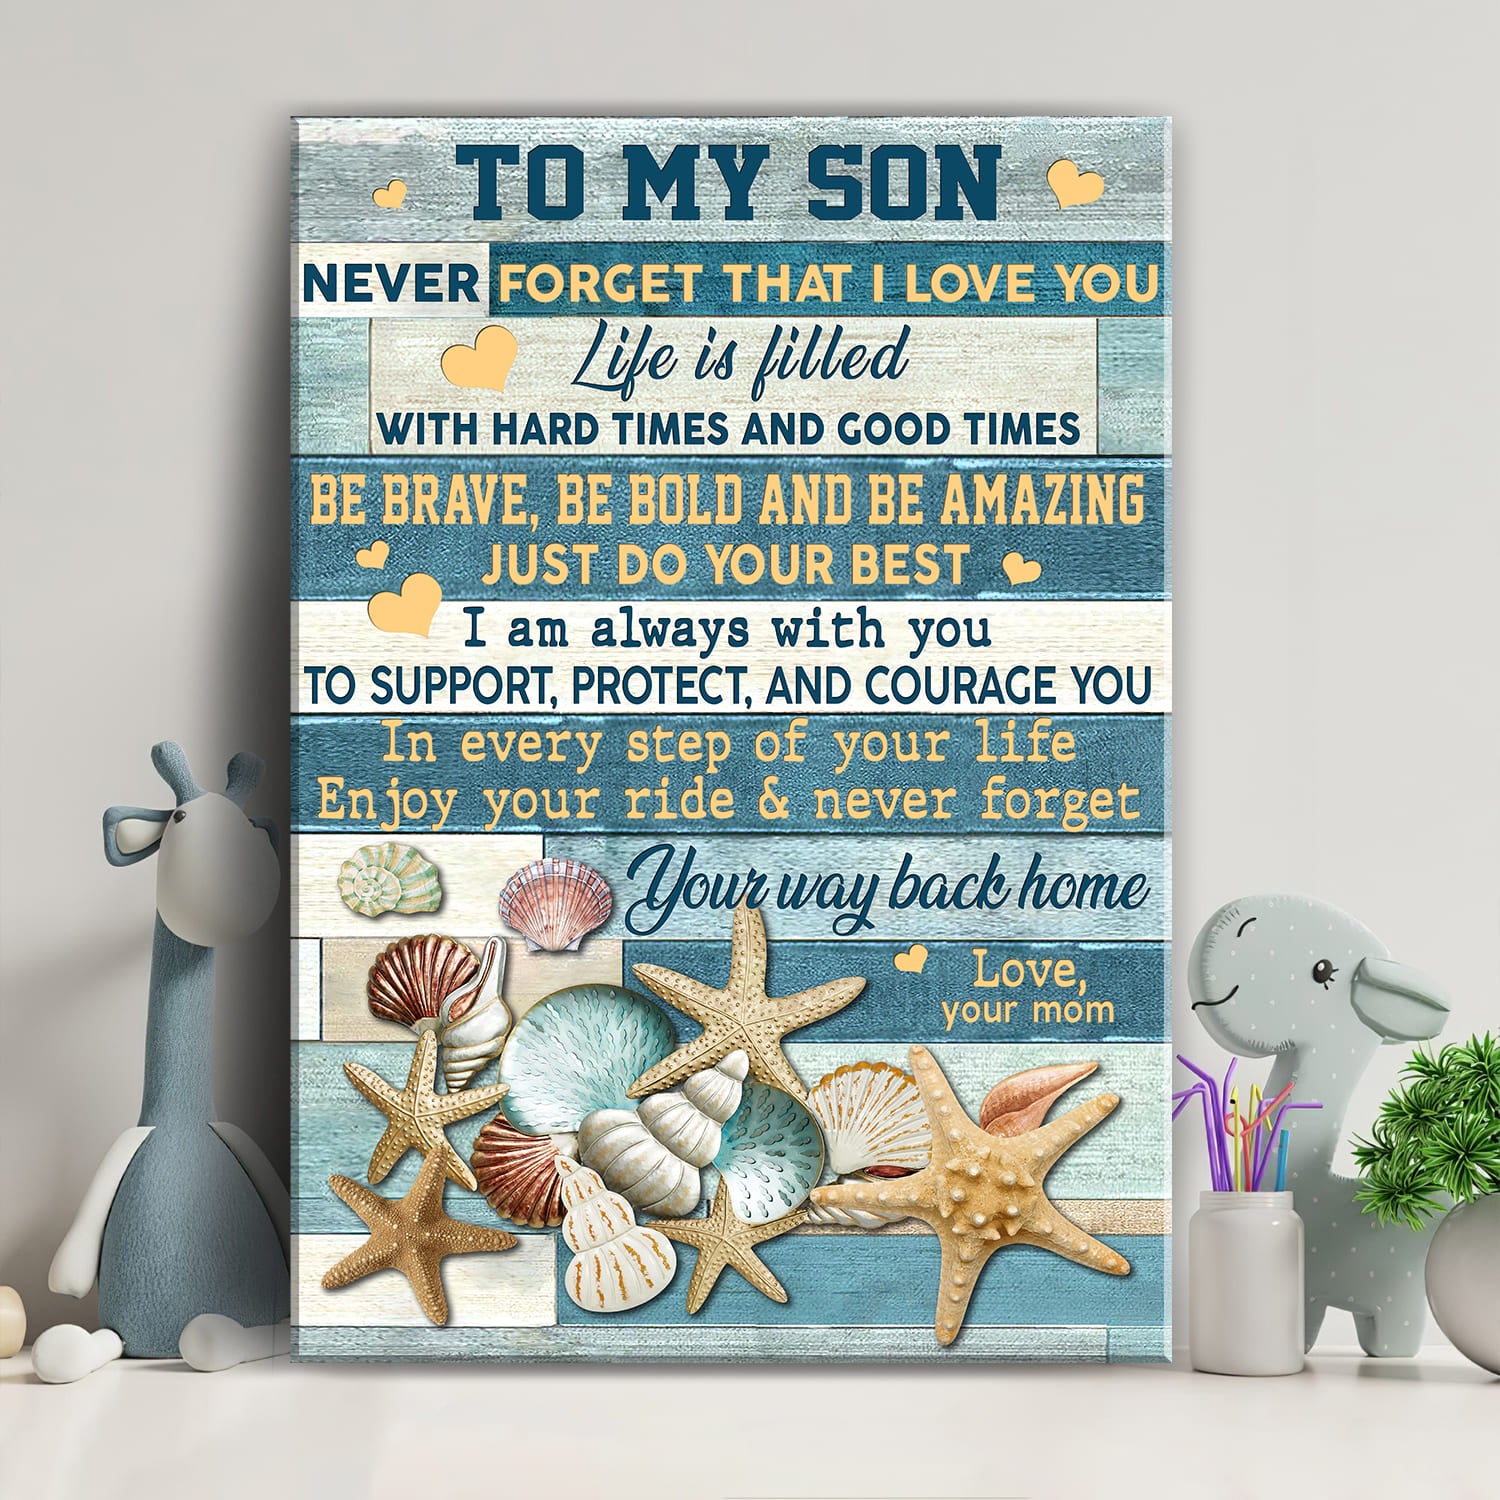 Mom to son, Seashells, Never forget that I love you - Family Portrait Canvas Prints, Wall Art